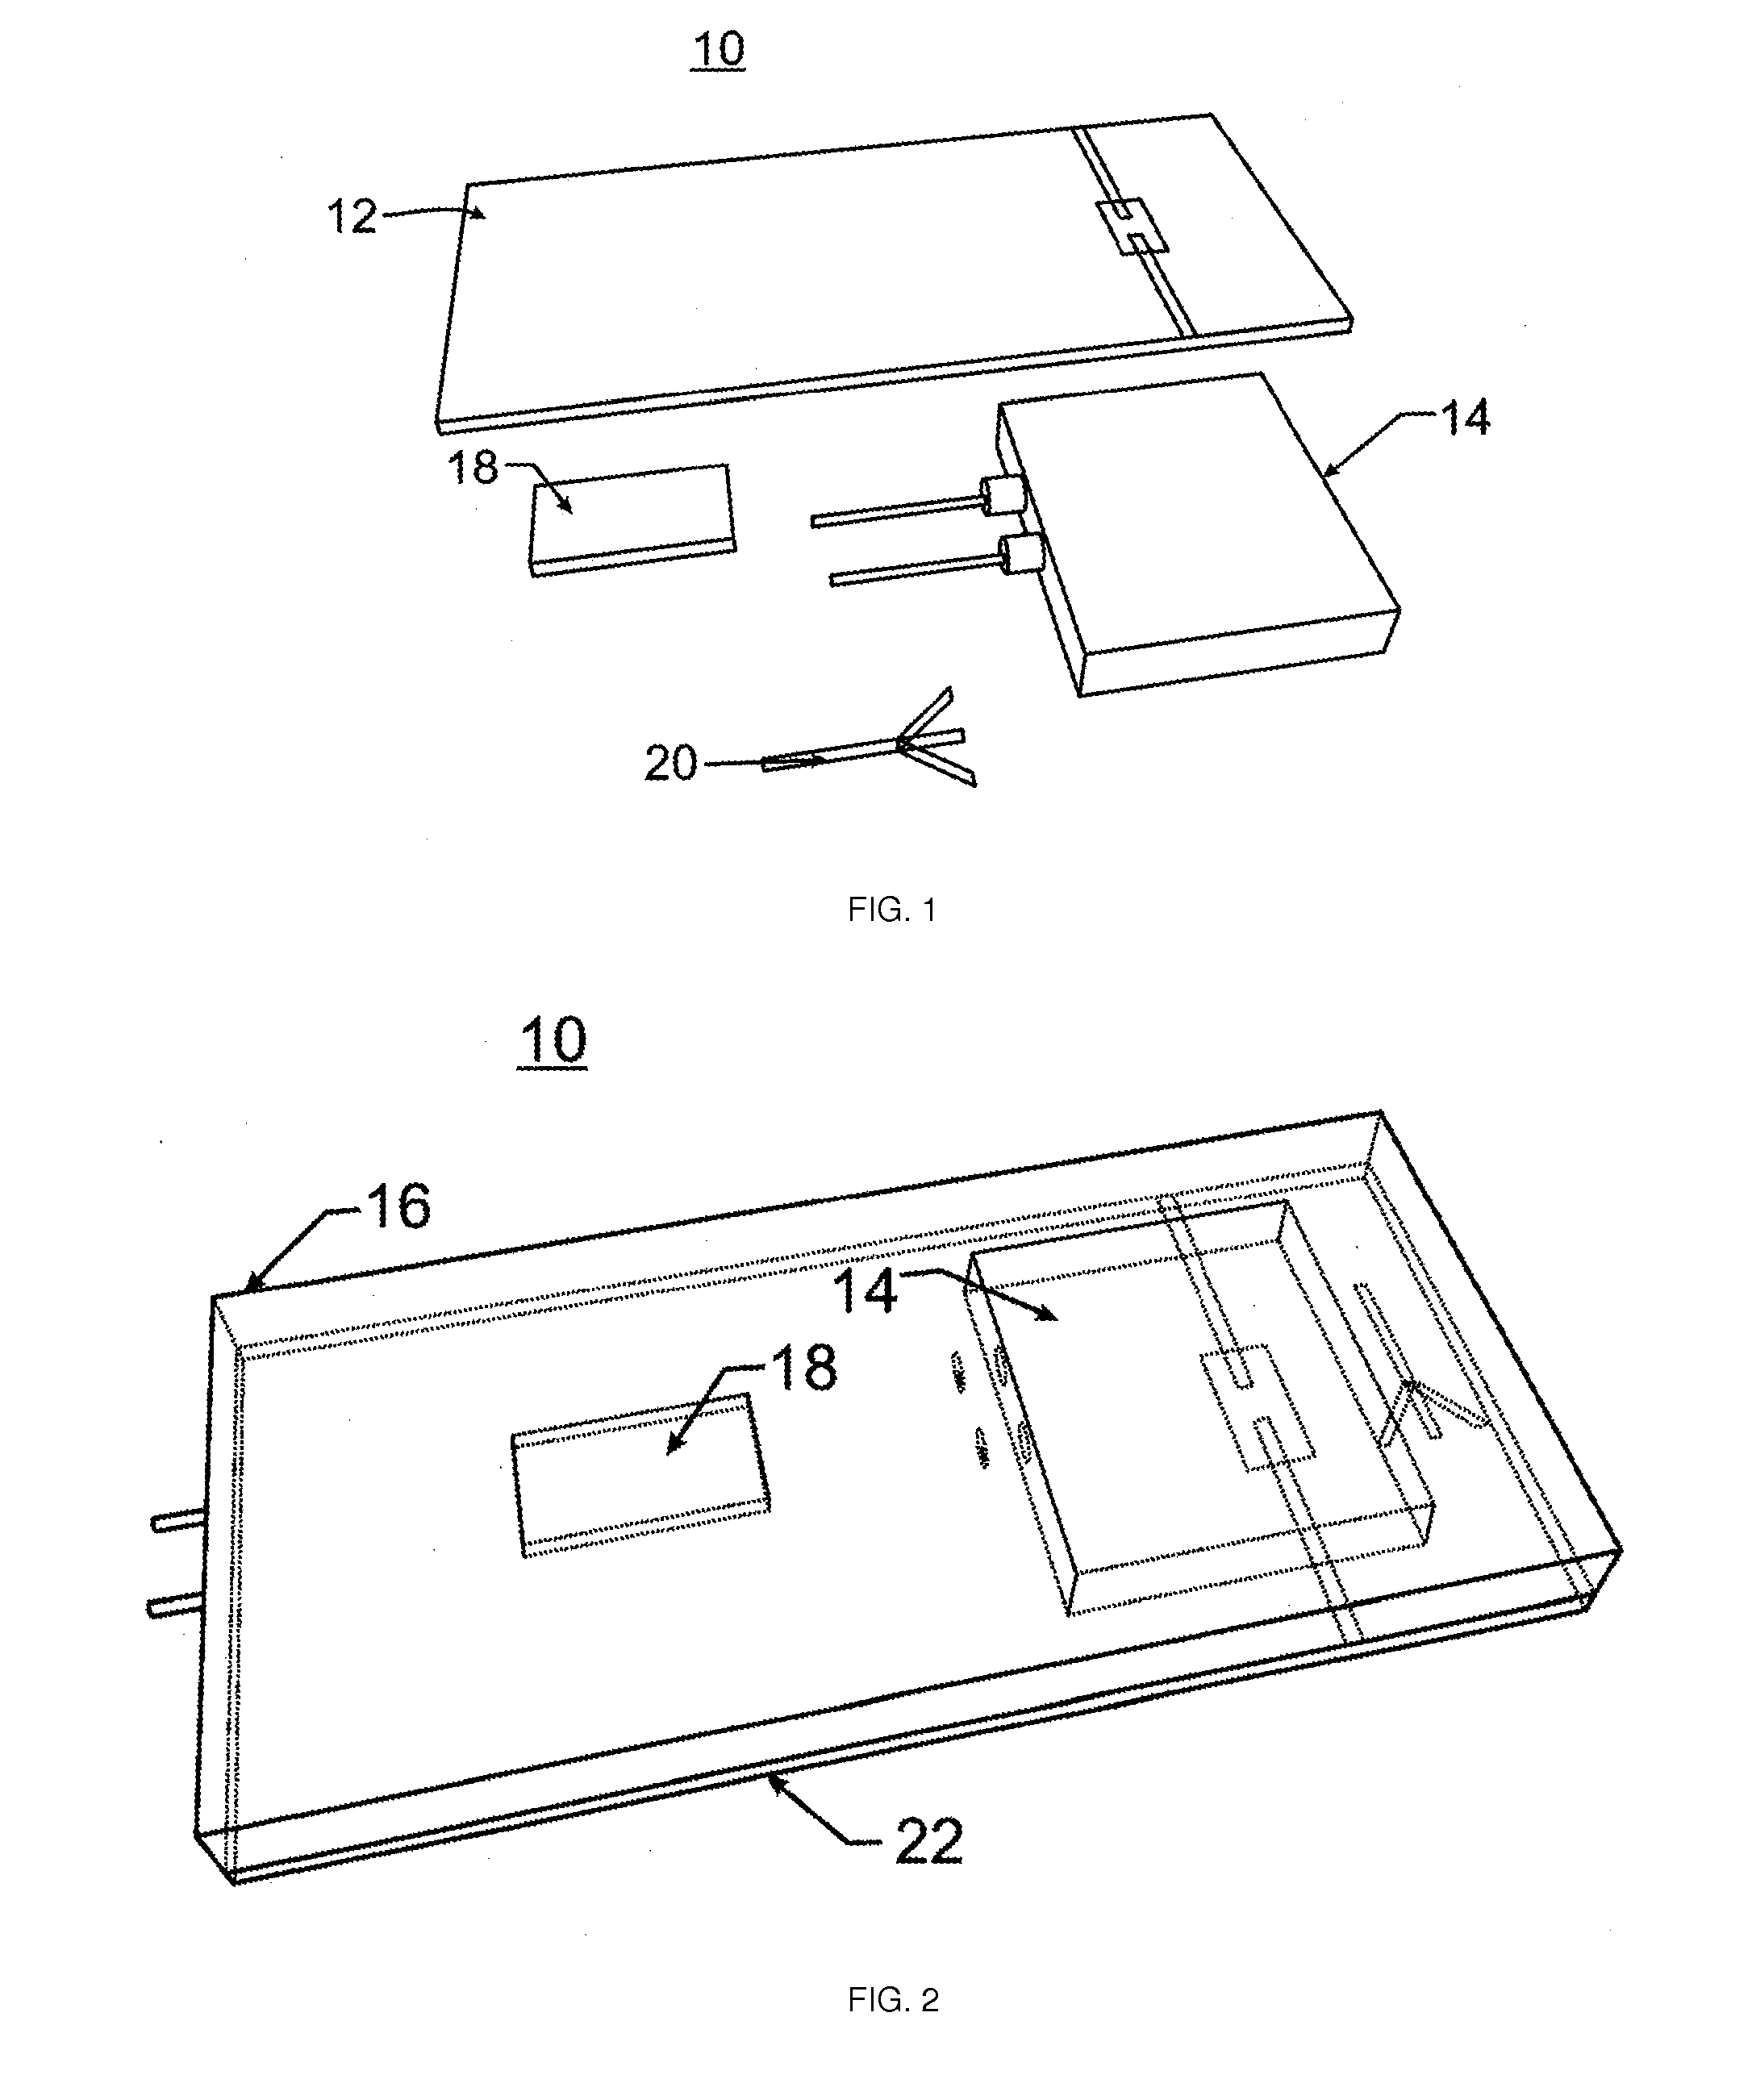 System and method for on-demand electrical power